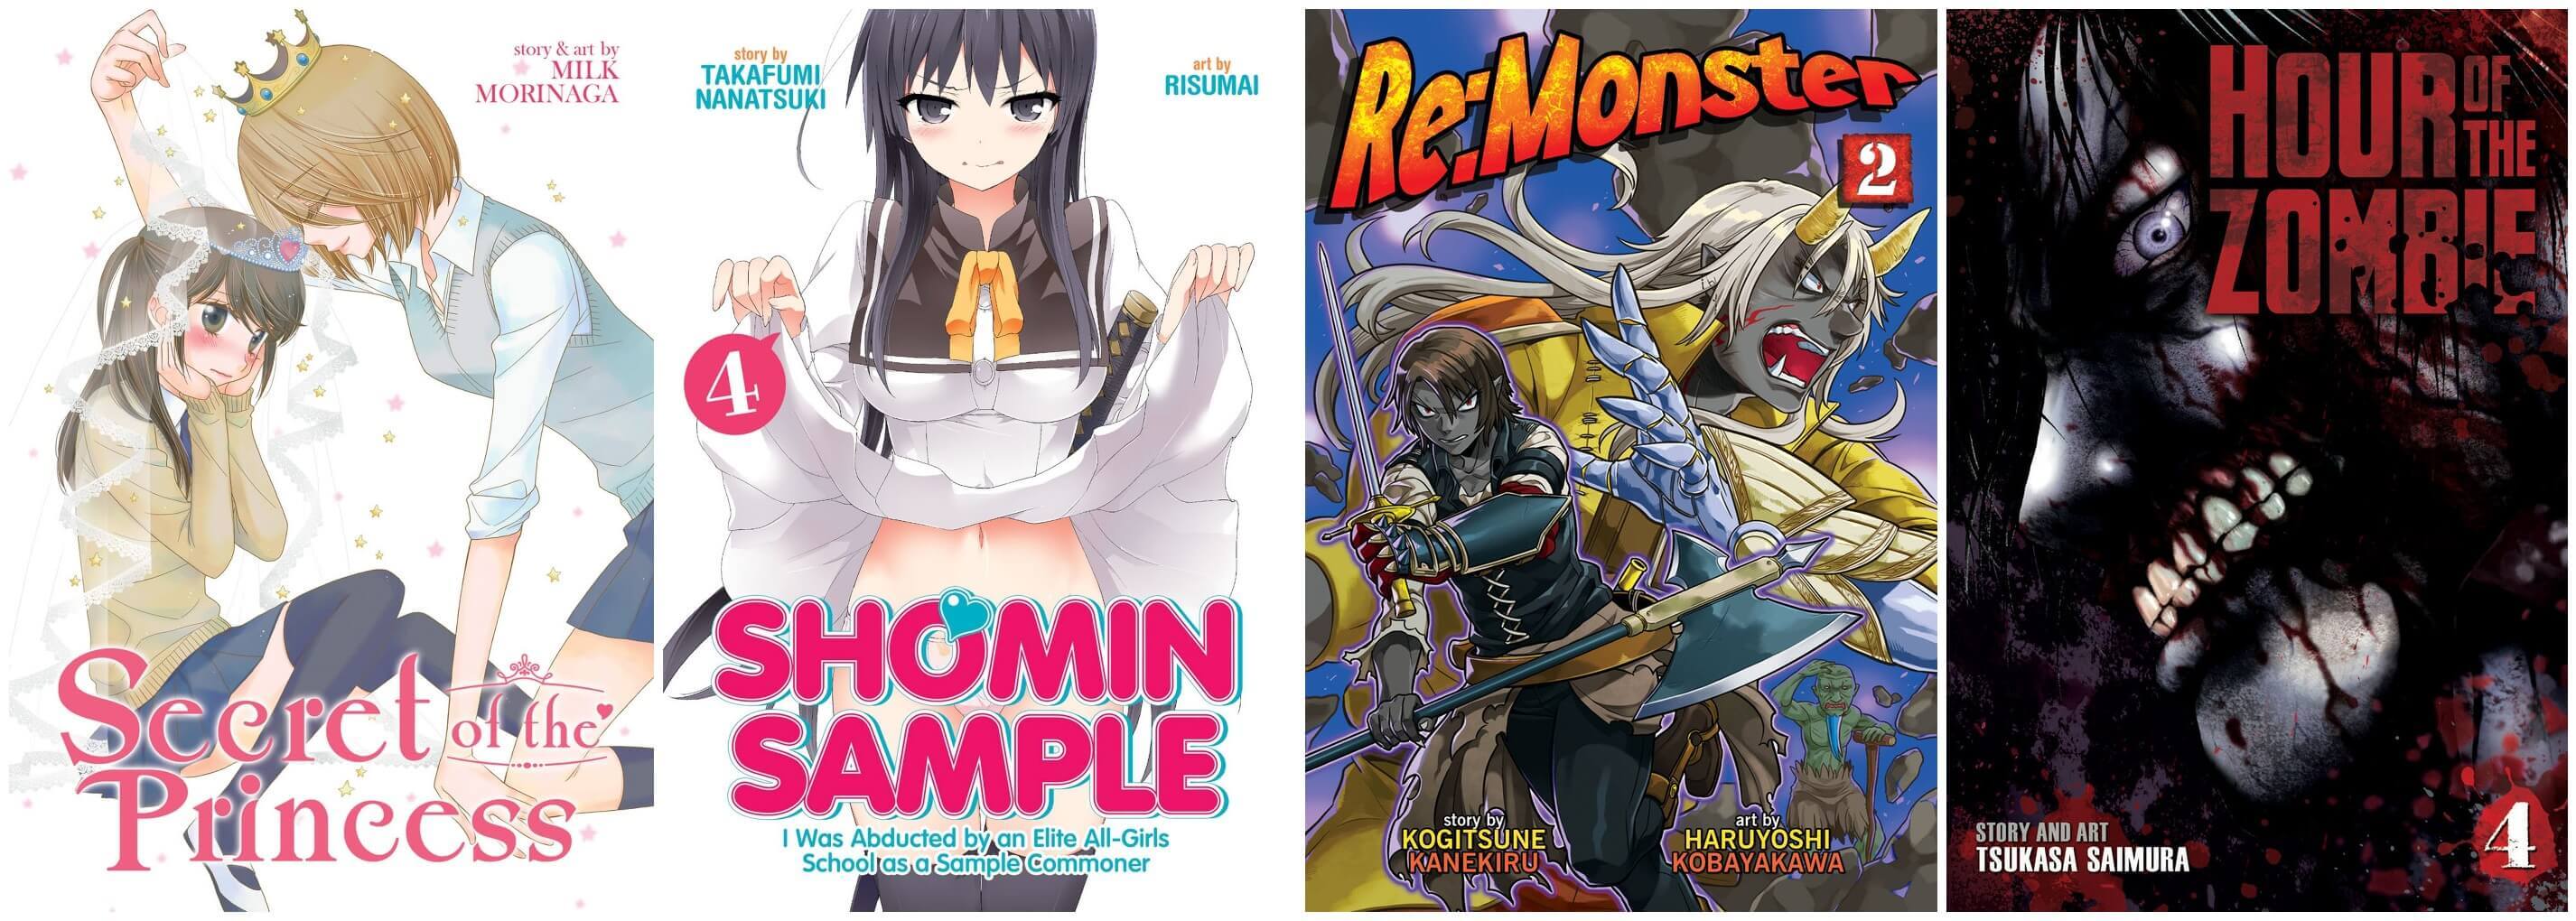 February 2017 Manga Releases Covers of Secret of the Princess, Shomin Sample, Re:Monster, and Hour of the Zombie.